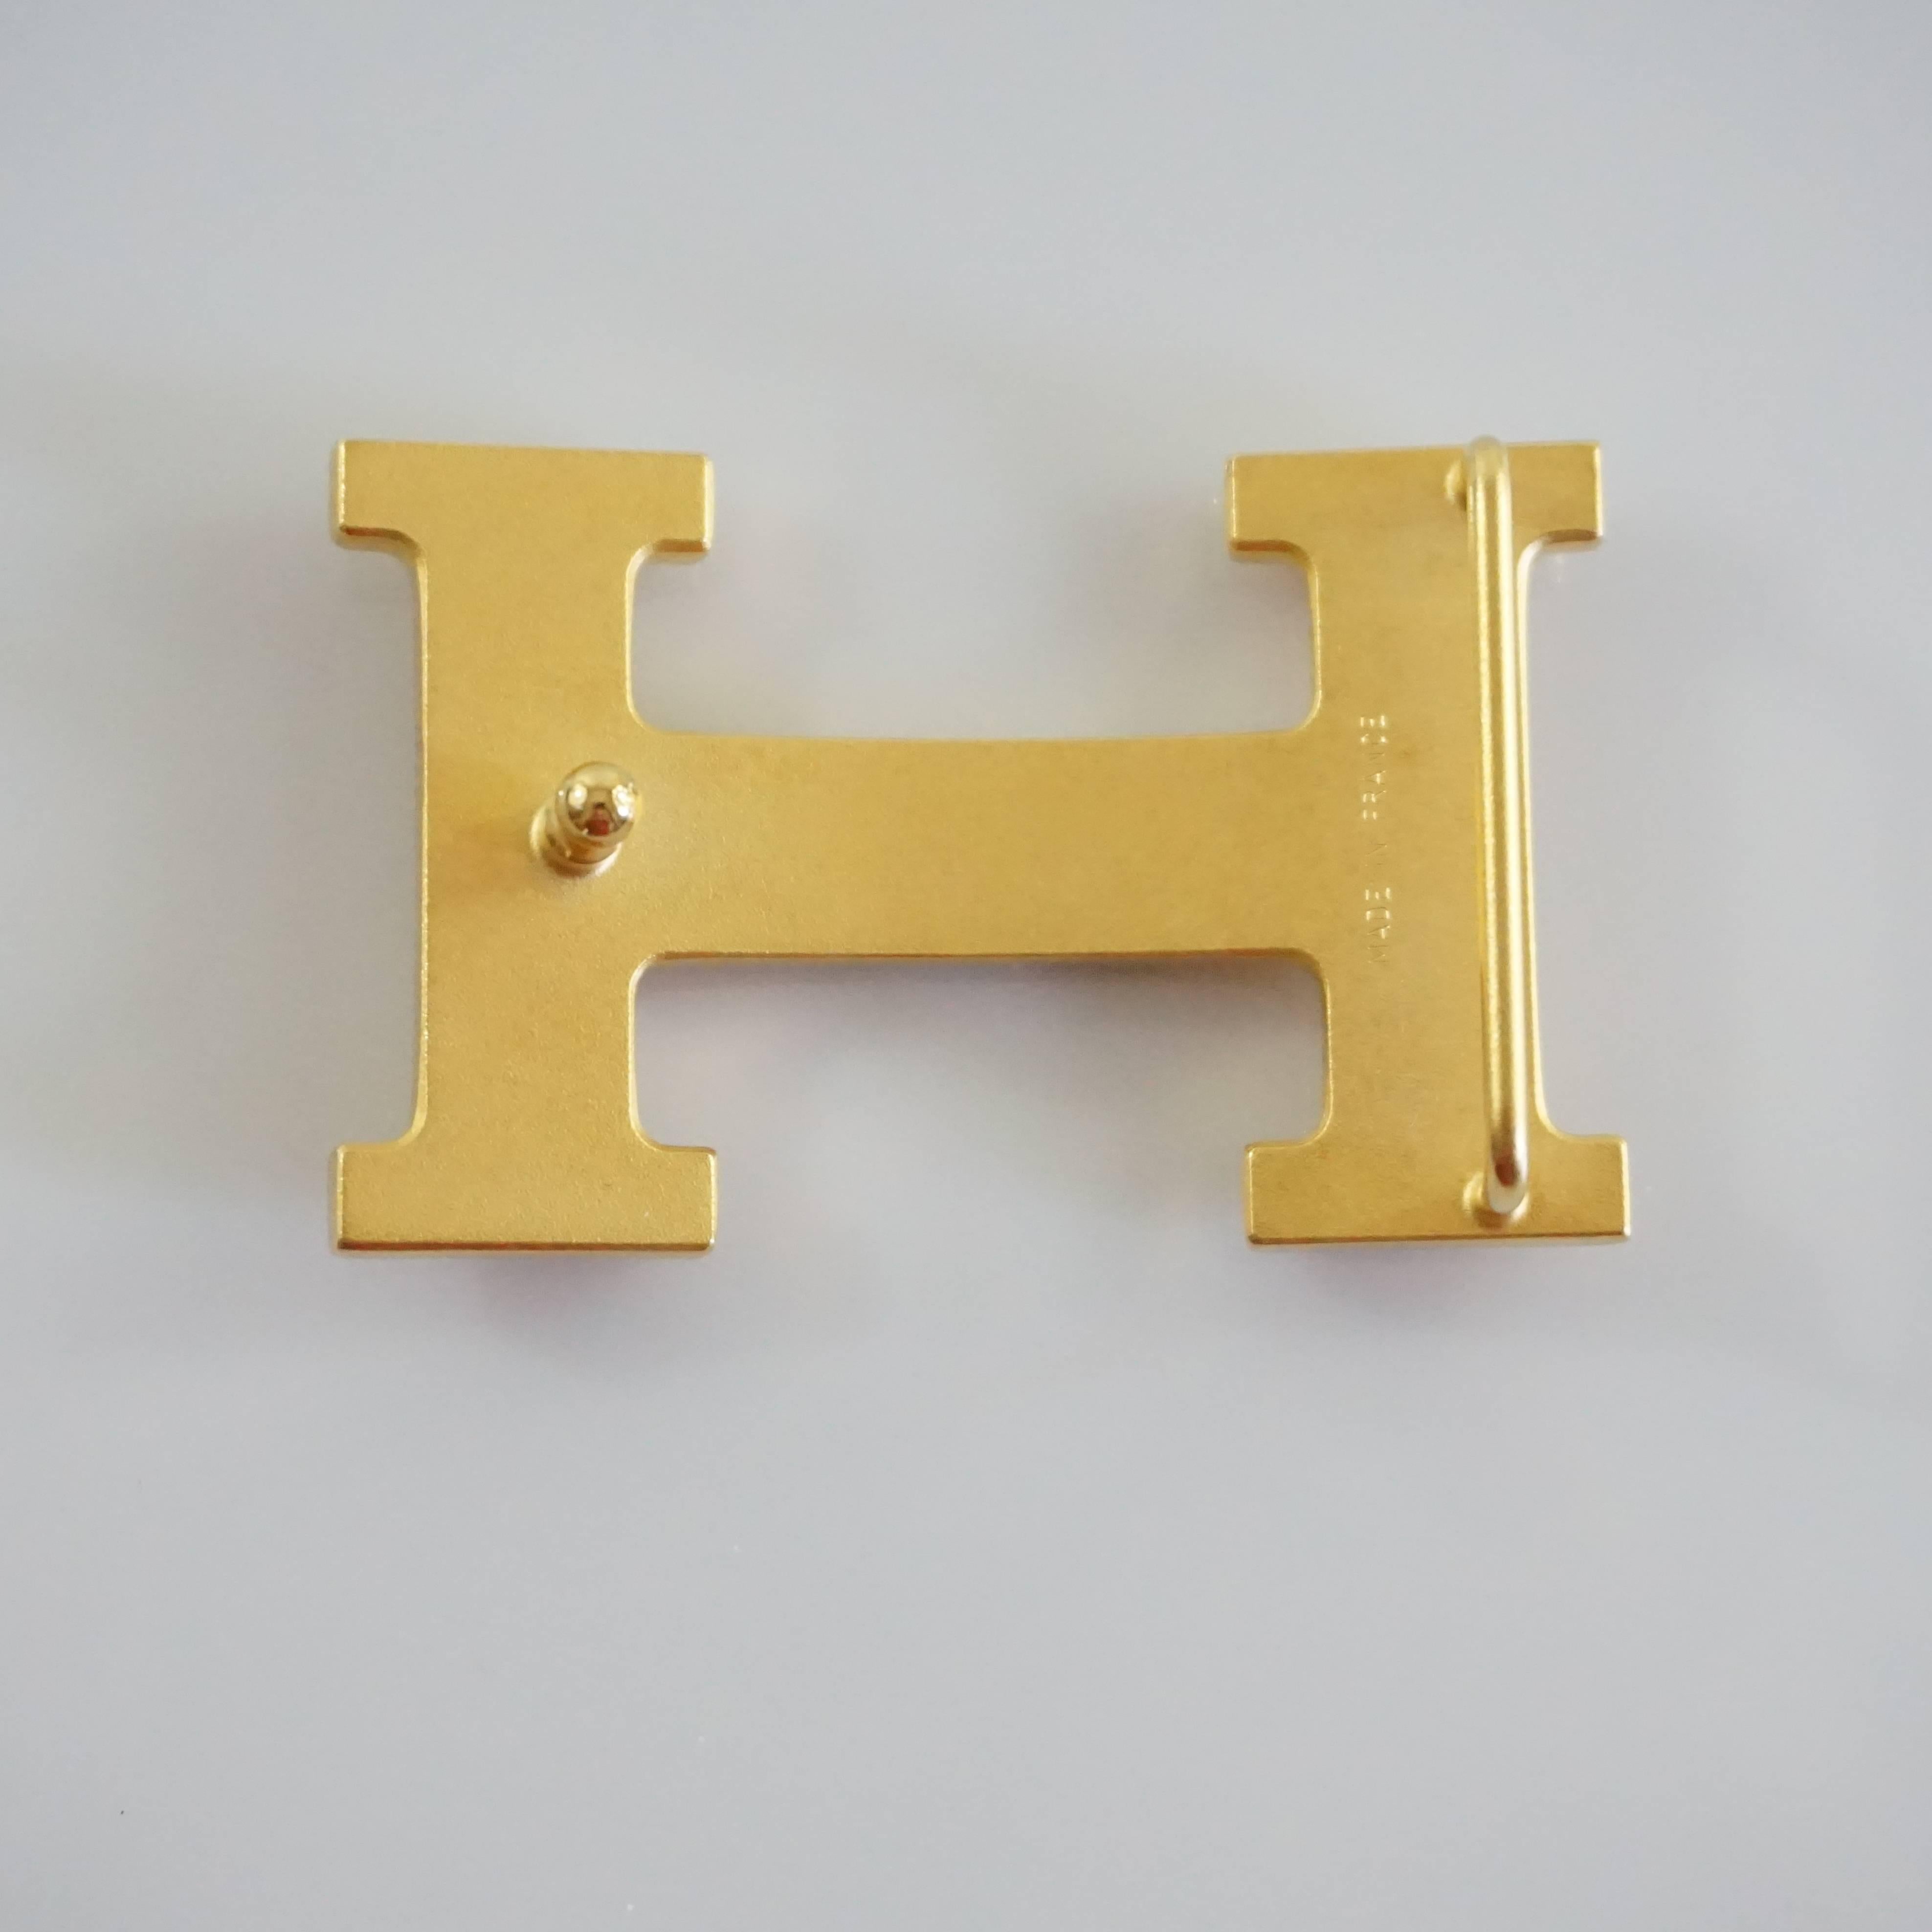 This Hermes matte gold H buckle is a staple. It comes with a duster and is in fair condition with scuffing on the front as shown in the images. 

Measurements
Height: 1.5